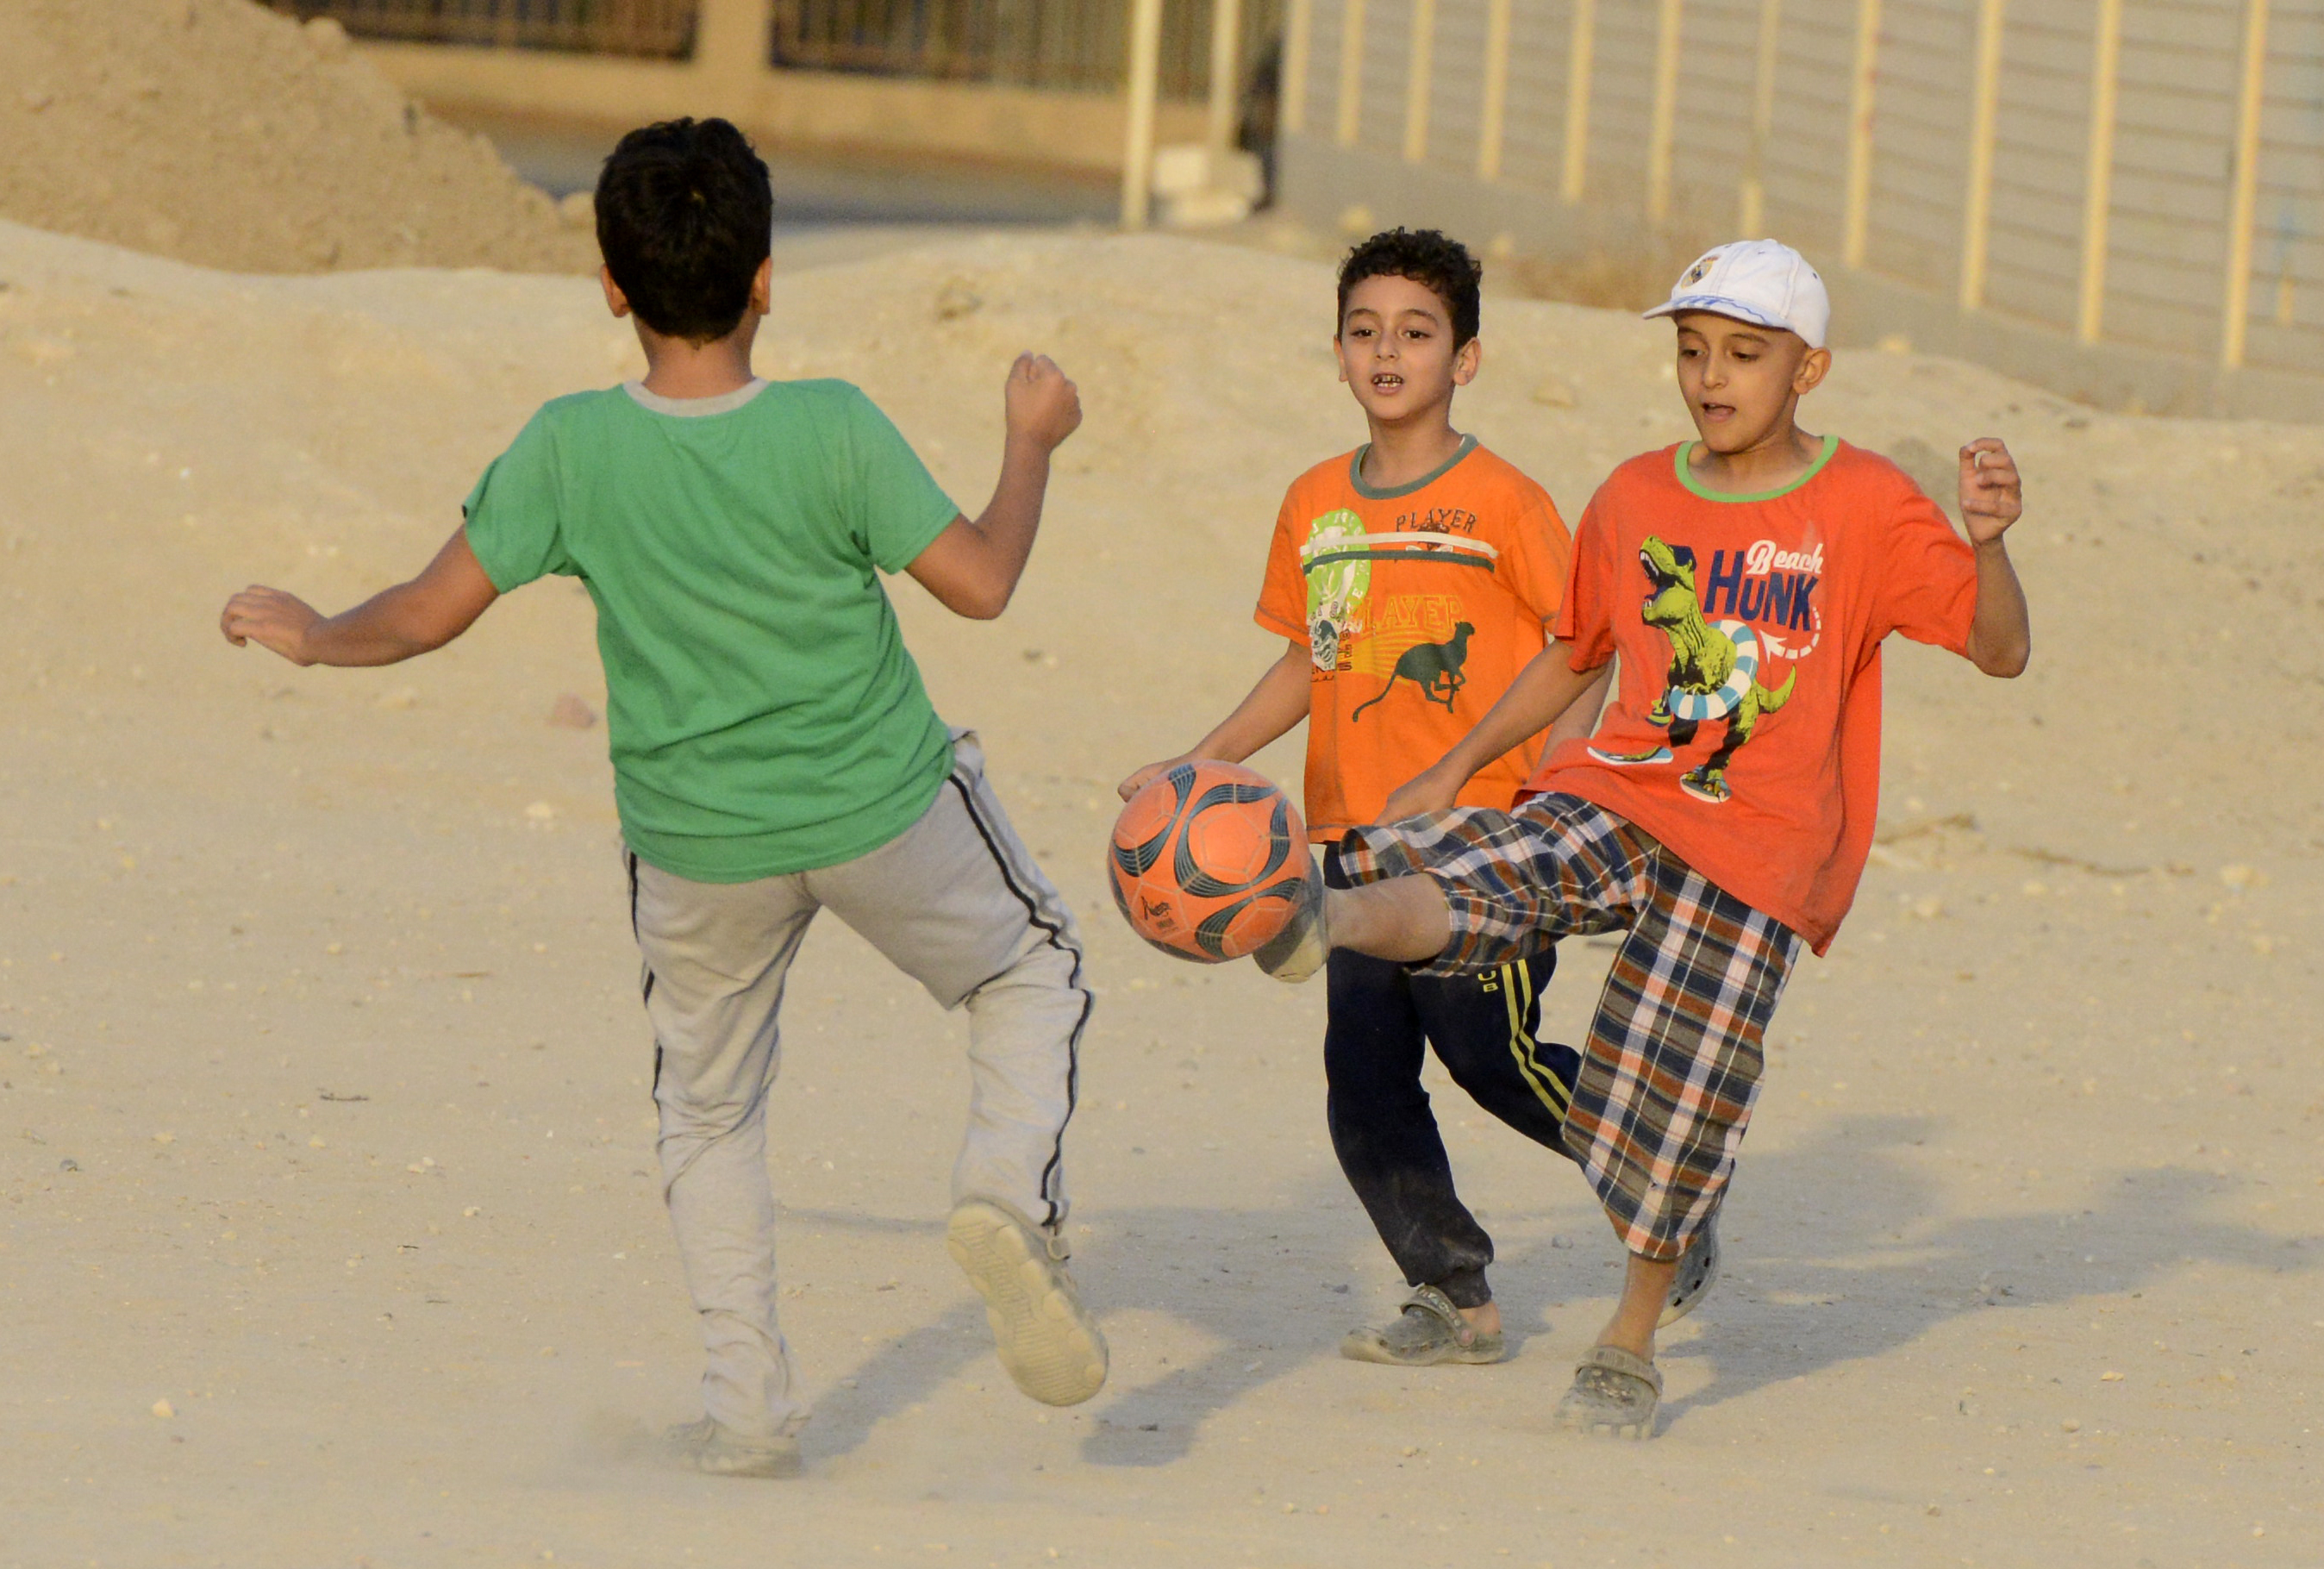 A group of children playing football in dirt pitches